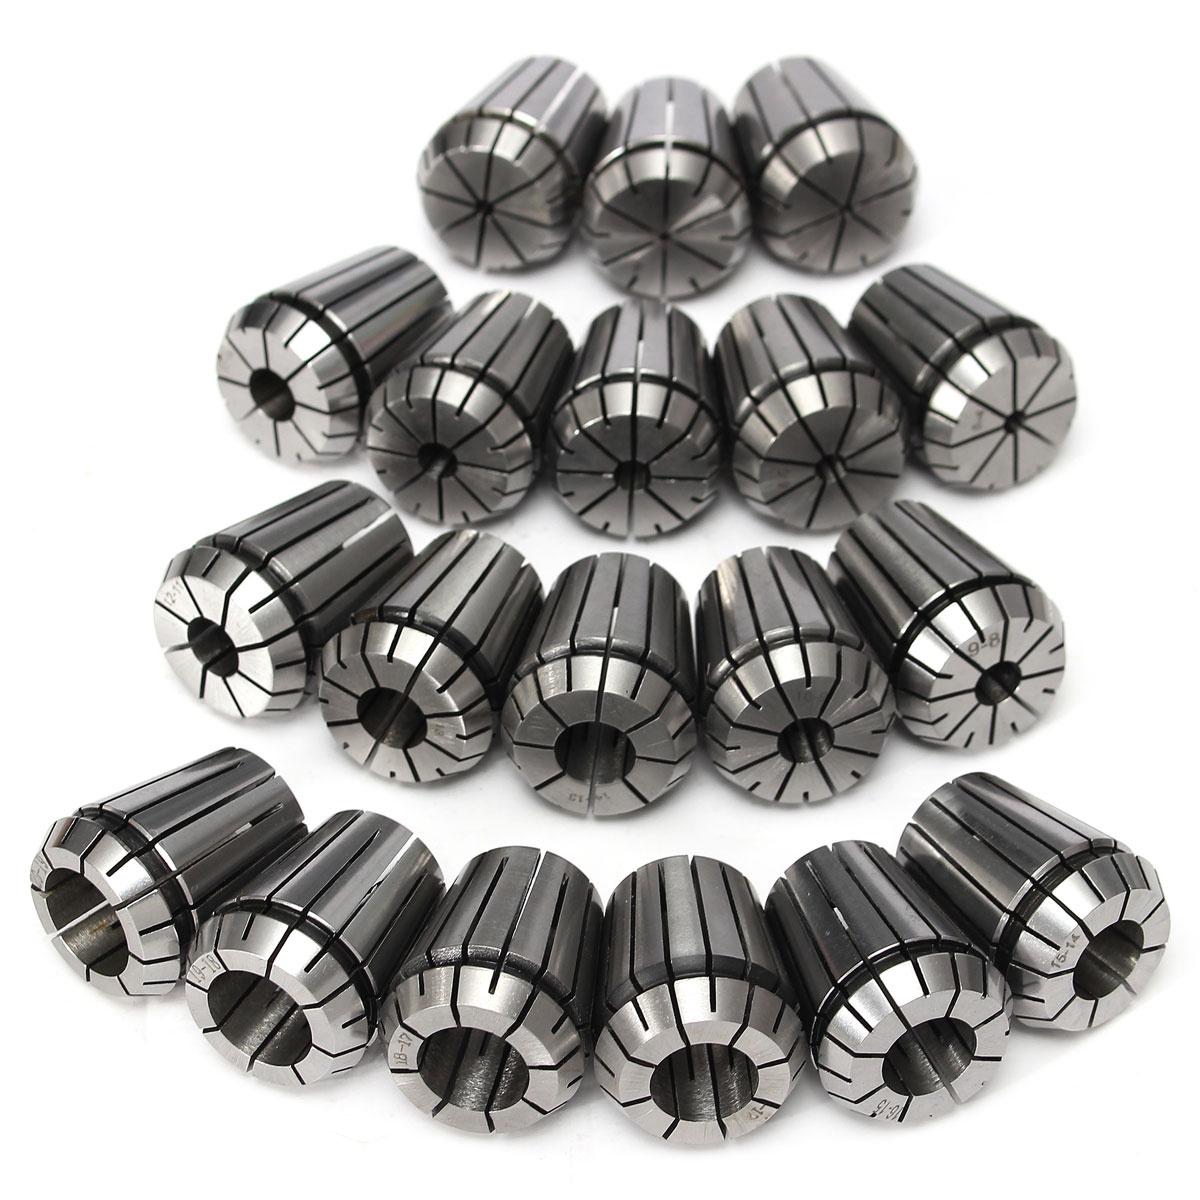 19Pcs-ER32-2mm-20mm-Precision-Spring-Chuck-Set-for-CNC-Workholding-Engraving-and-Milling-Lathe-Tool-1853943-4